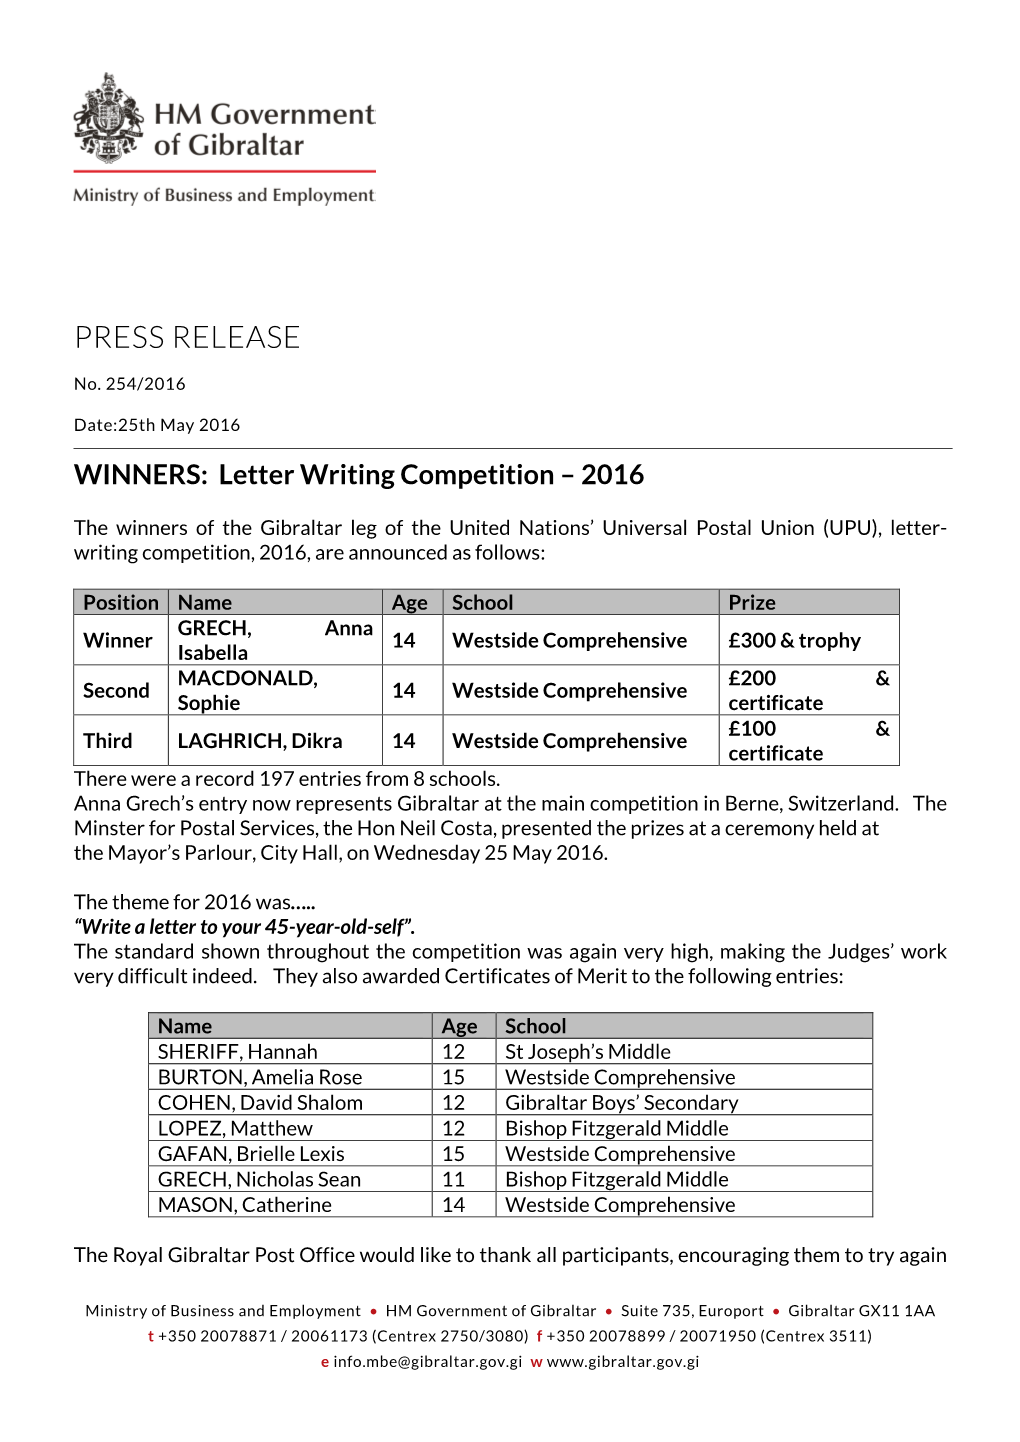 WINNERS: Letter Writing Competition – 2016